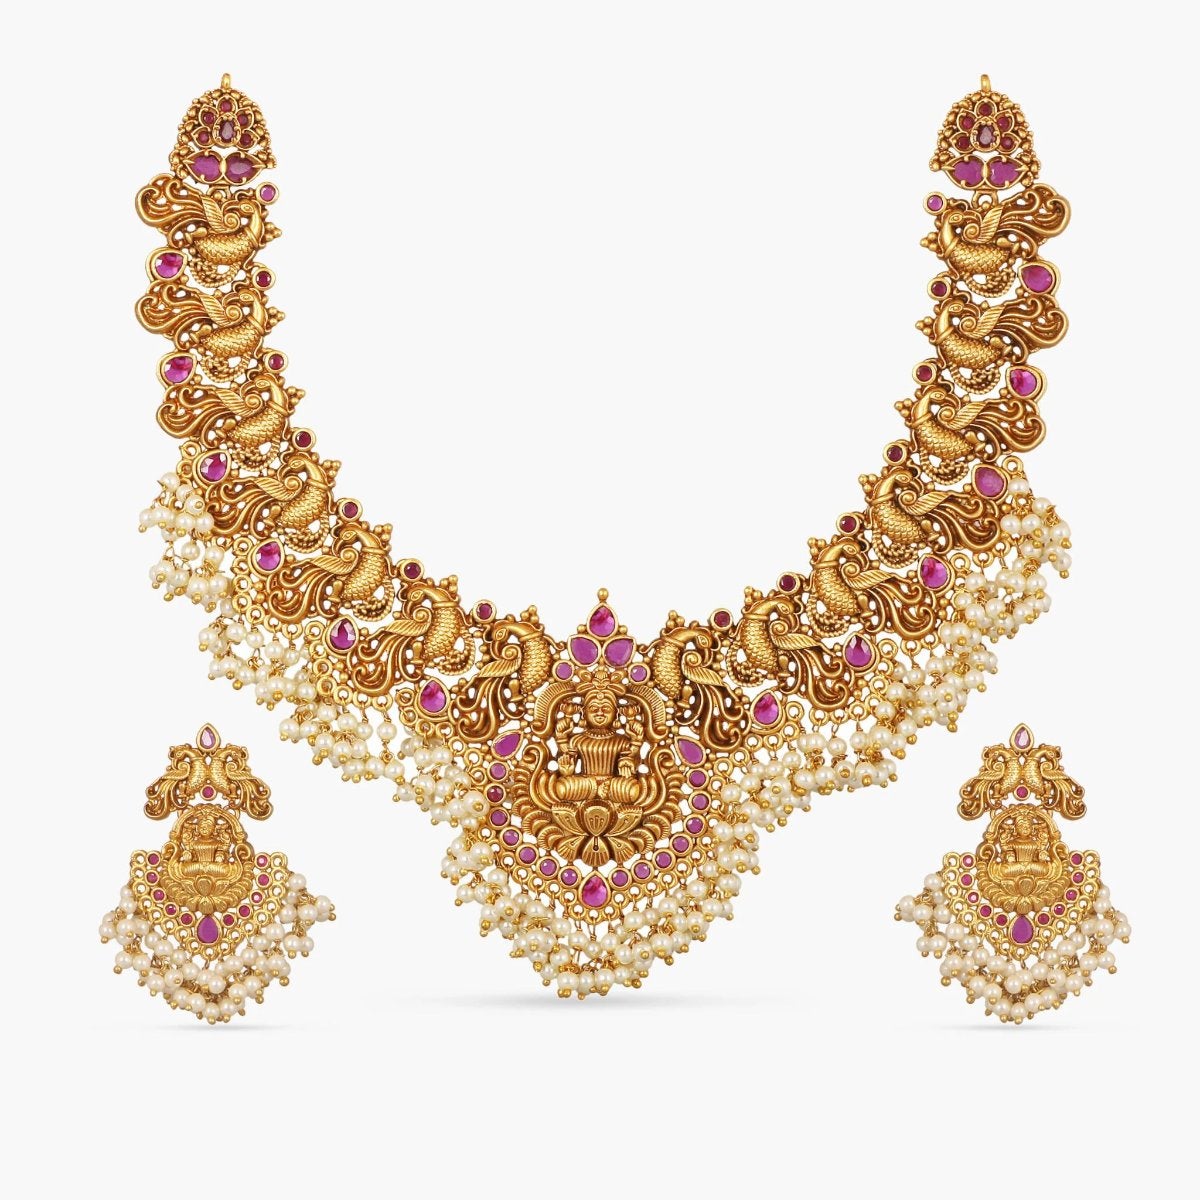 A picture of an Indian artificial gold plated necklace set with a divine Goddess Laxmi motif pendant with matching earrings.